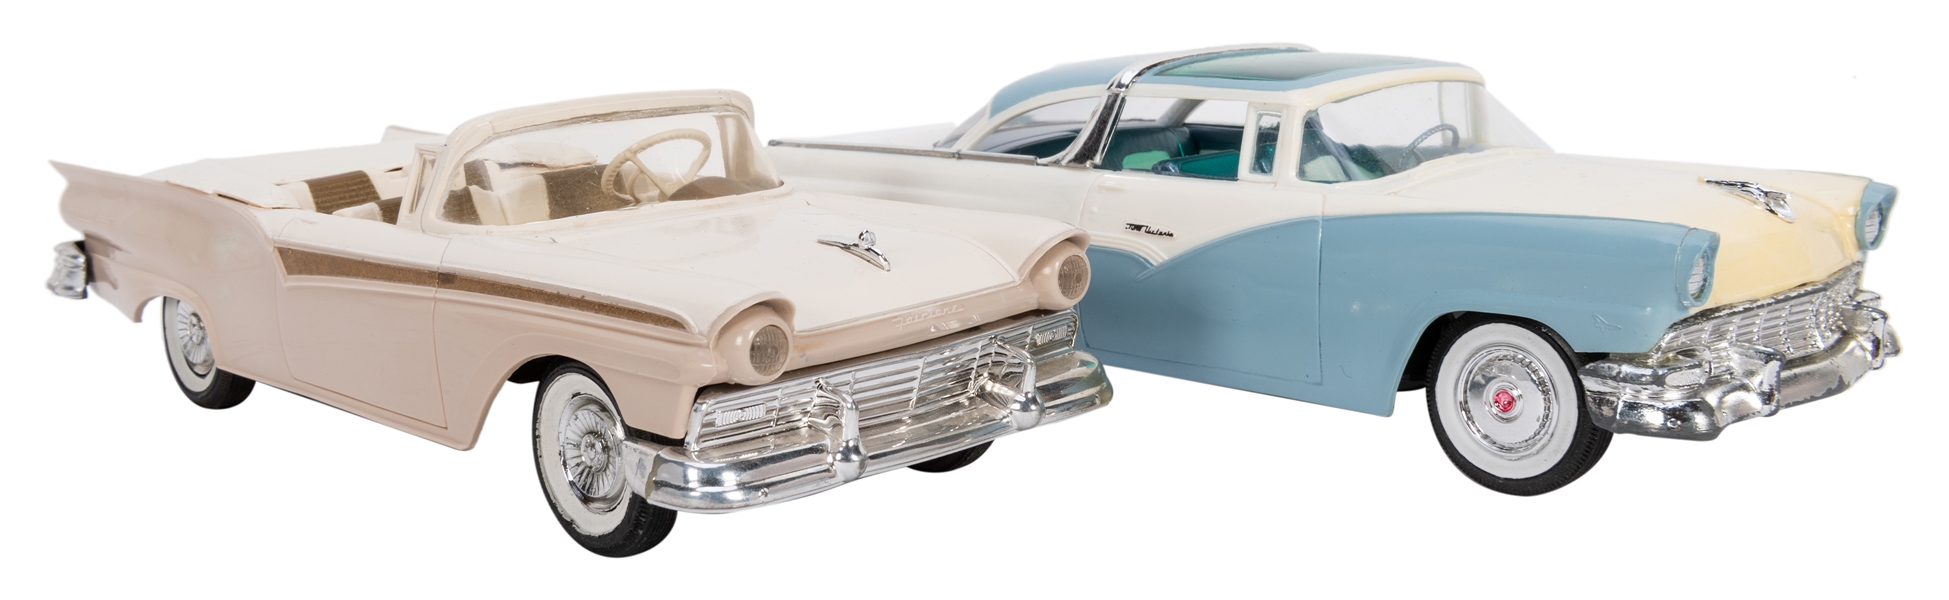  Lot of 2 1950s Ford Fairlane Promo Cars.